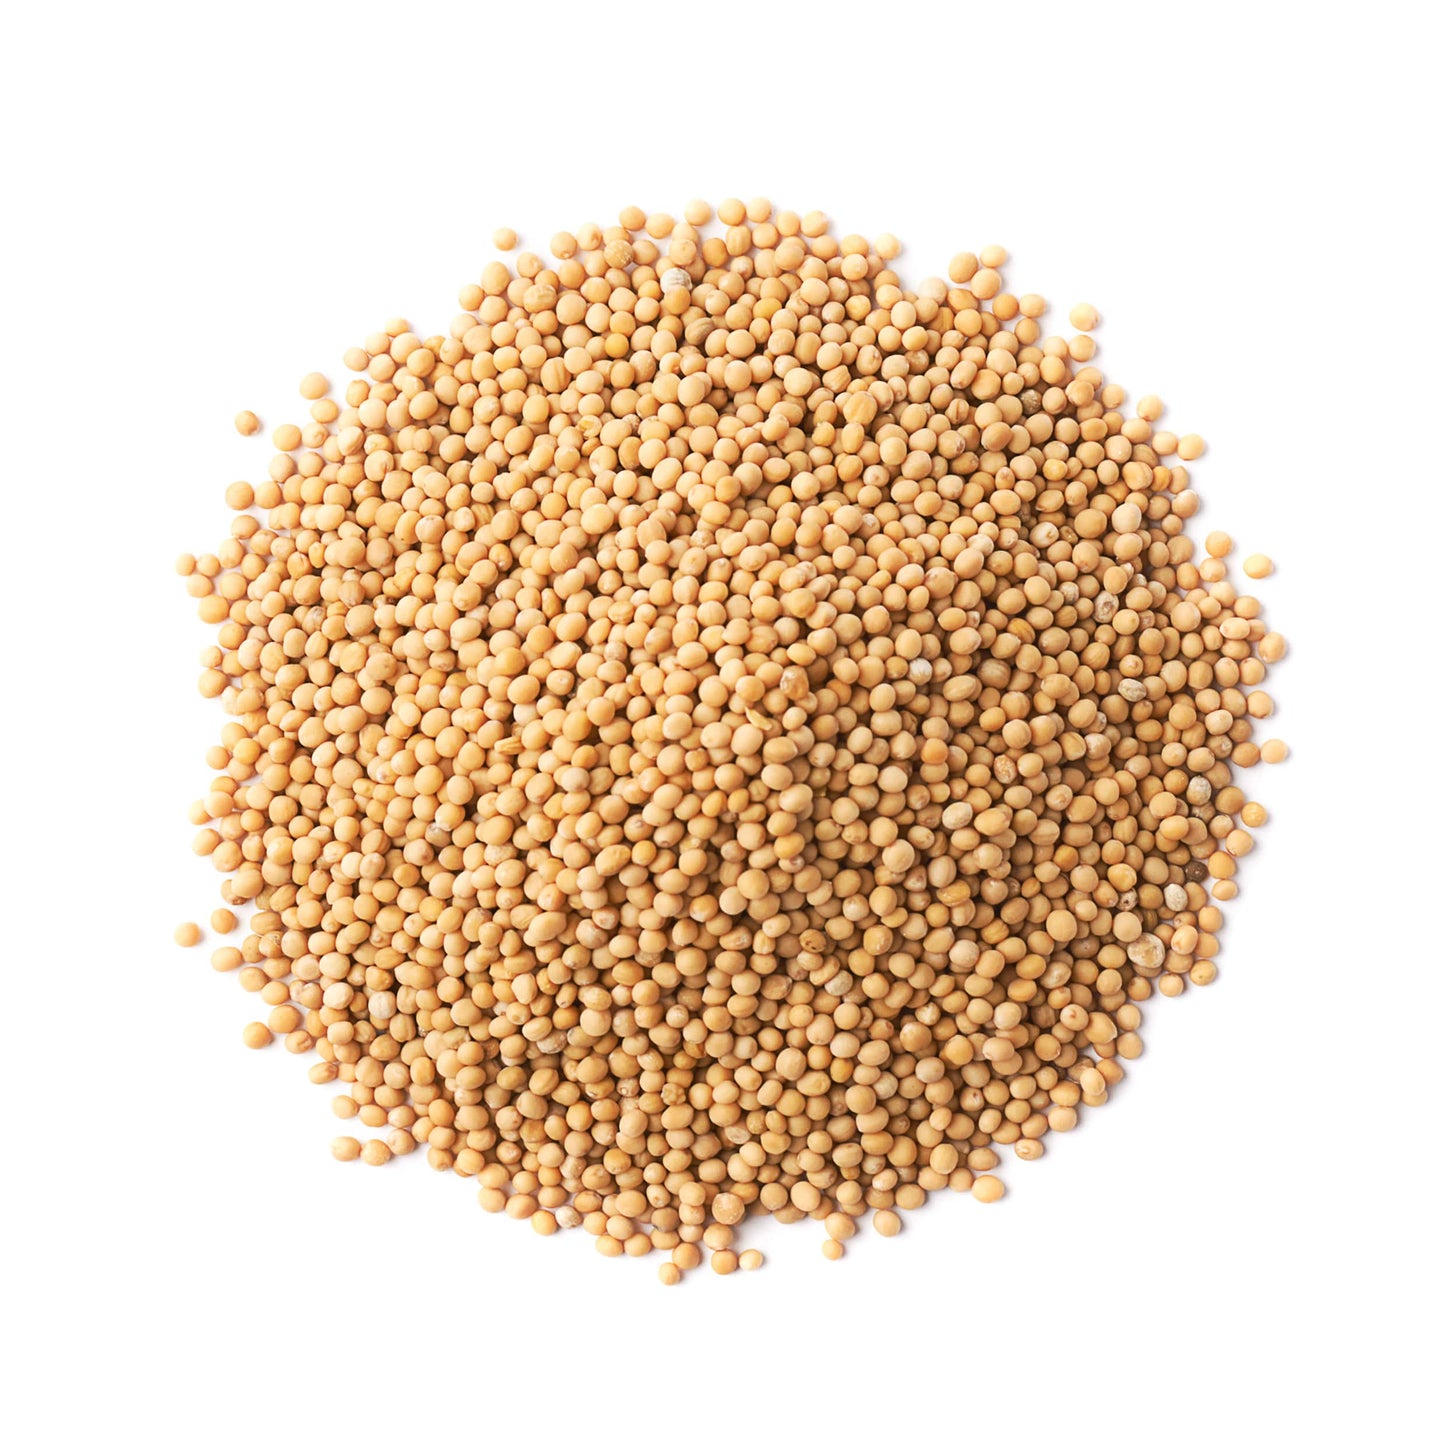 Organic Mustard Seeds - Whole Yellow Seeds, Non-GMO, Kosher, Raw, Dried, Hot Spice, Bulk - by Food to Live